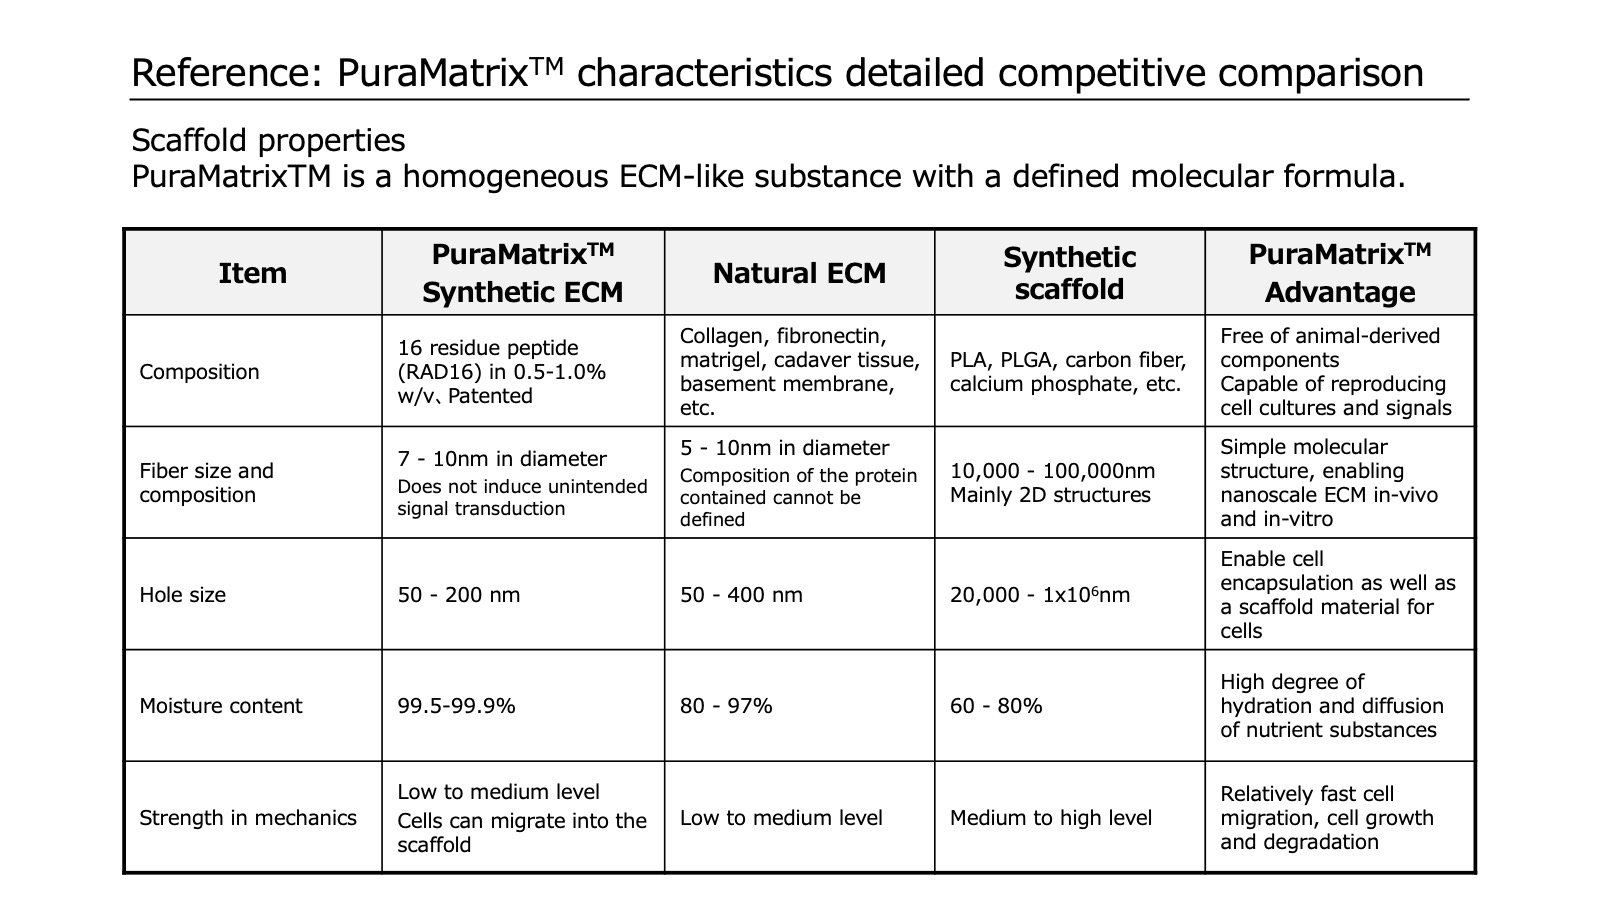 Comparison of characteristics of PuraMatrix™ with competitive products